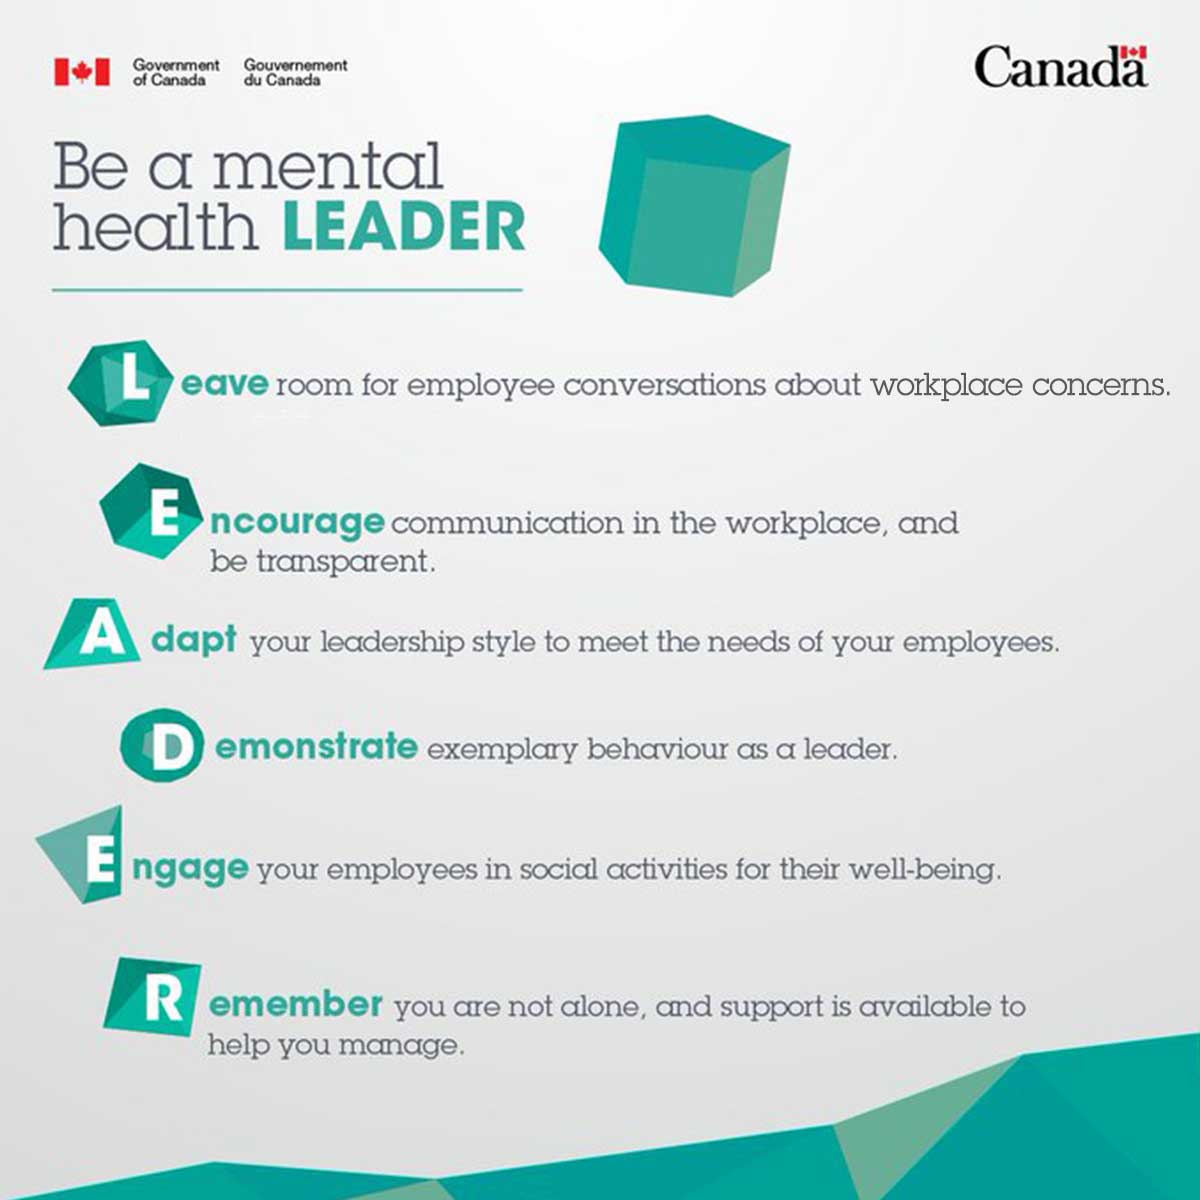 Healthy, safe work environments are important. Check out the “Be a mental health LEADER” site for ideas to put this into practice during #MentalHealthWeek (May 6-12): ow.ly/ib3E50Rxr90 #CompassionConnects